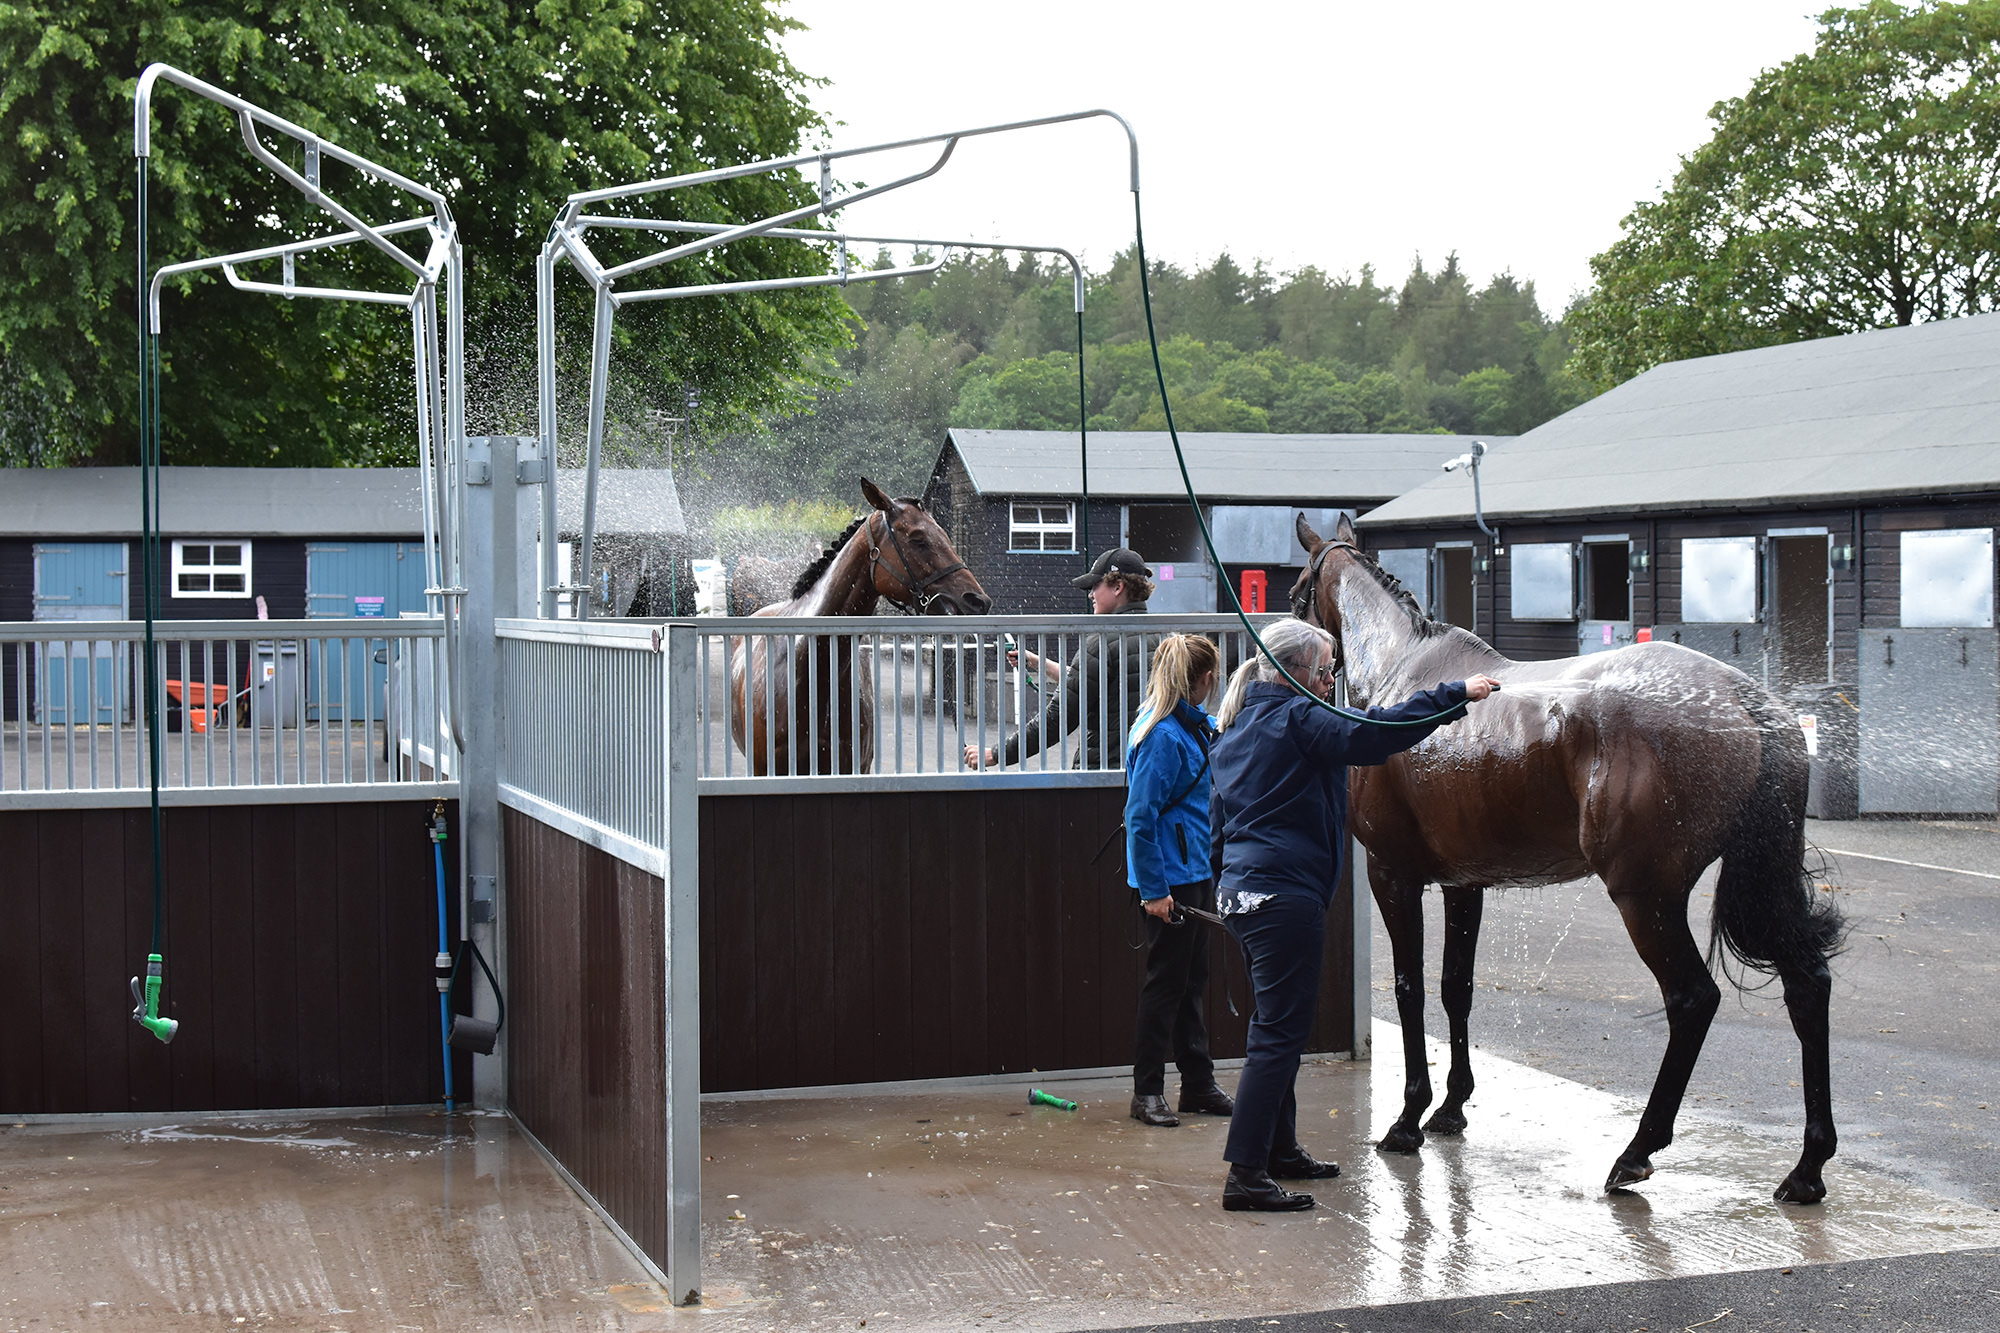 The New Stables in Action